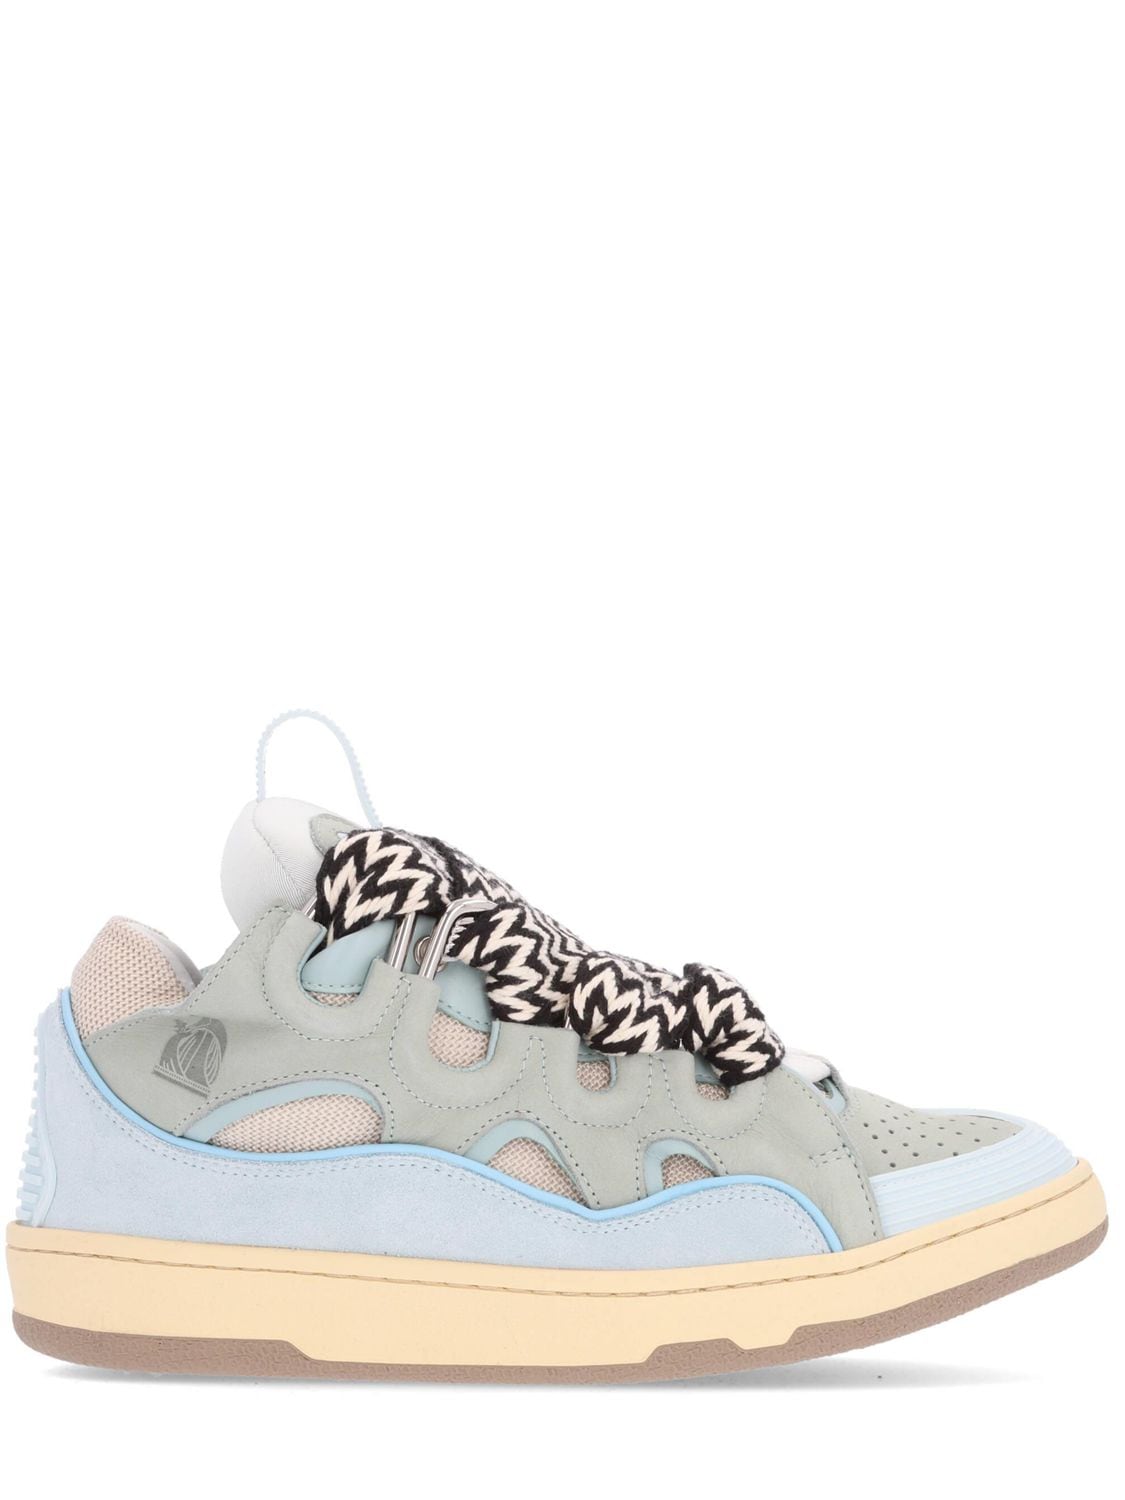 Shop Lanvin 30mm Curb Leather & Mesh Sneakers In Light Blue